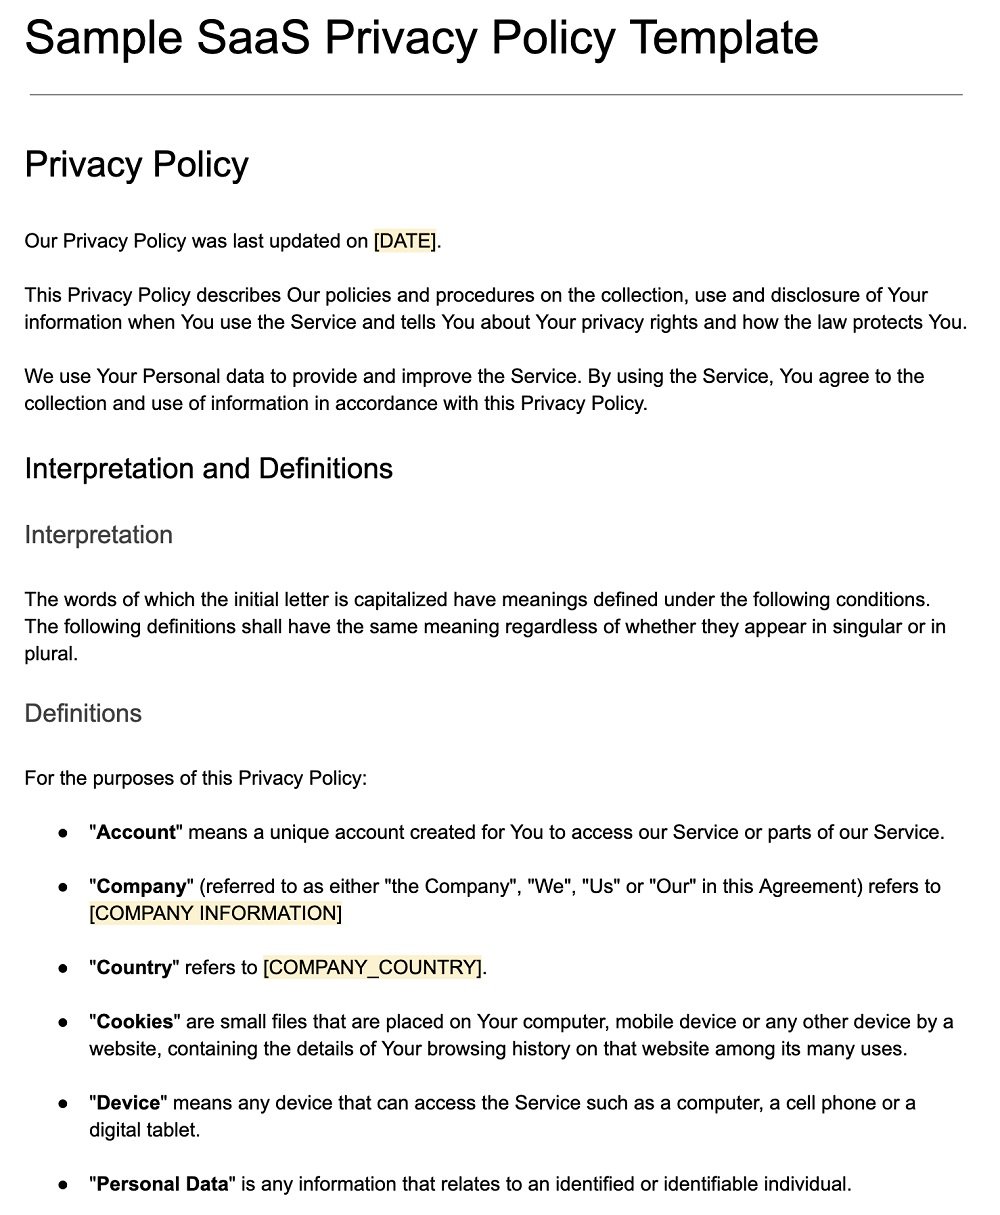 Sample SaaS Privacy Policy Template